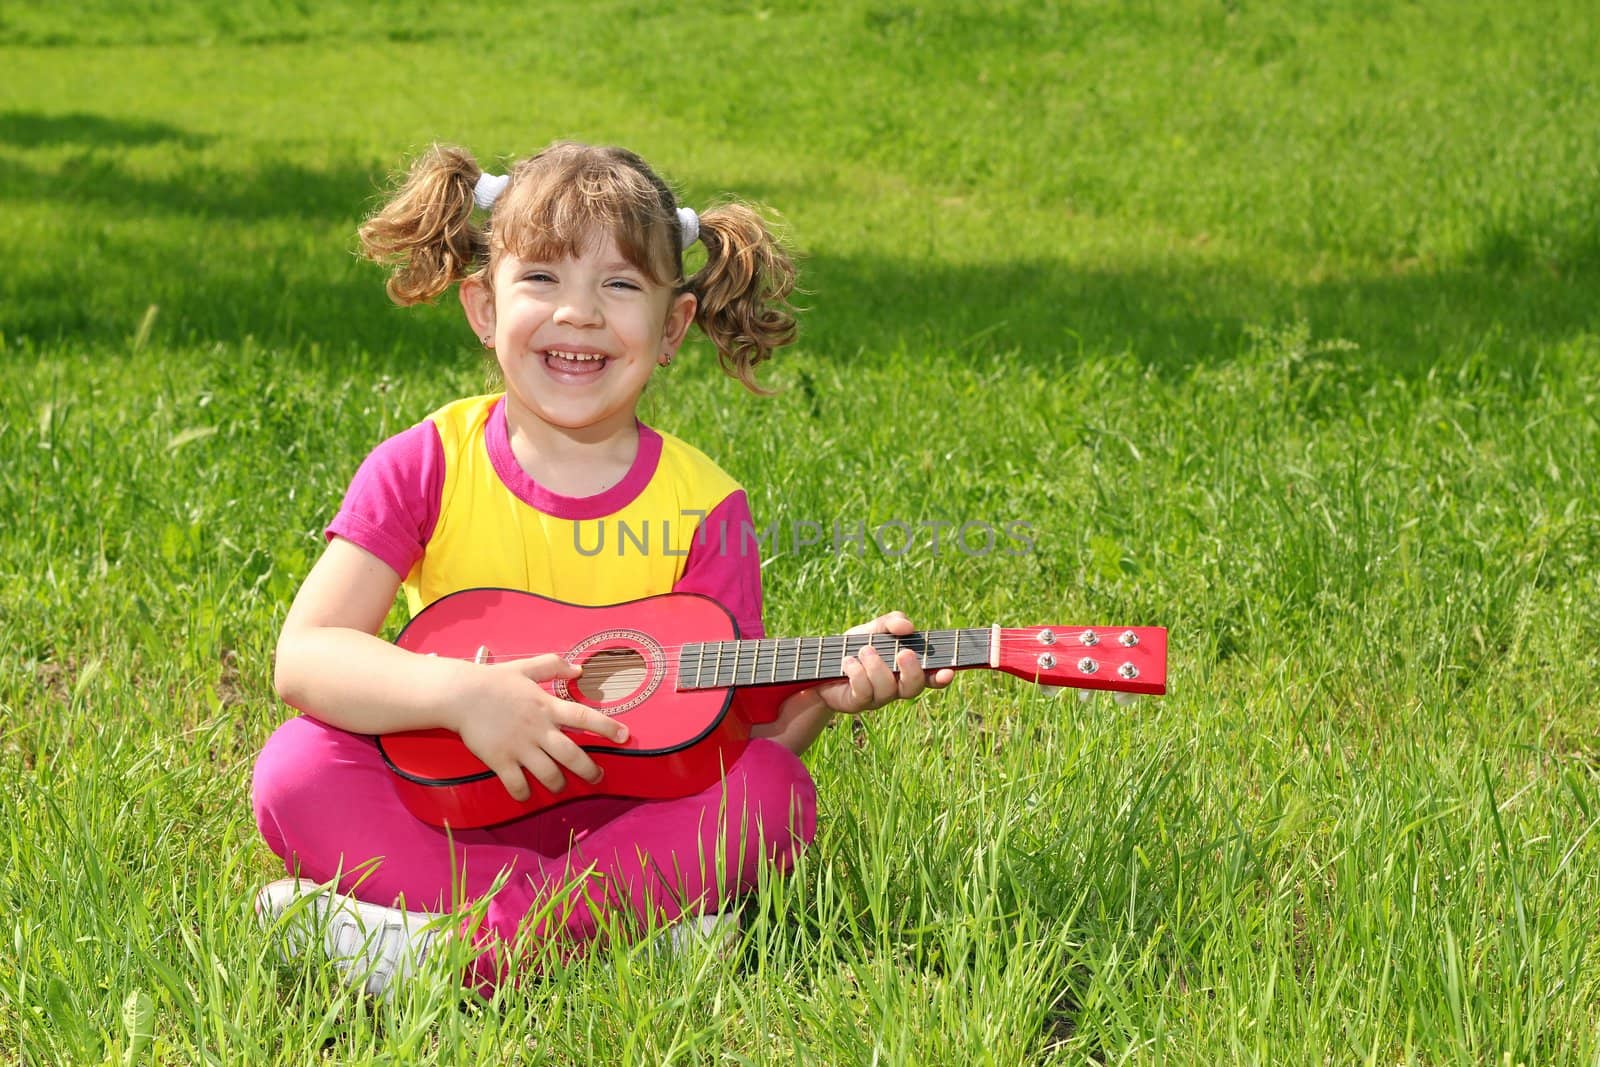 little girl sitting on grass and play guitar